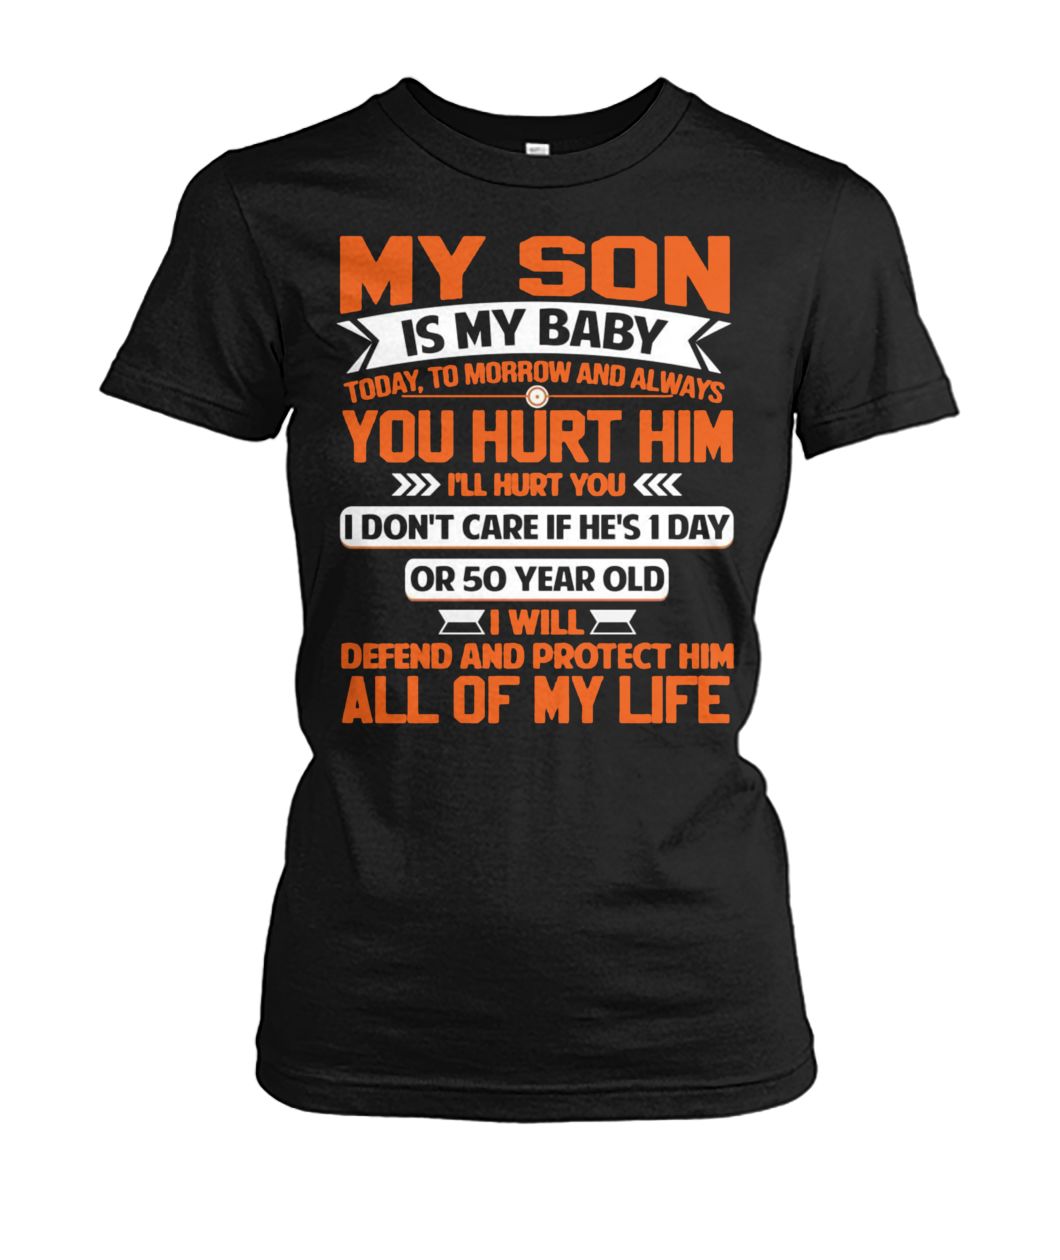 My son is my baby today tomorrow and always you hurt him I'll hurt you women's crew tee